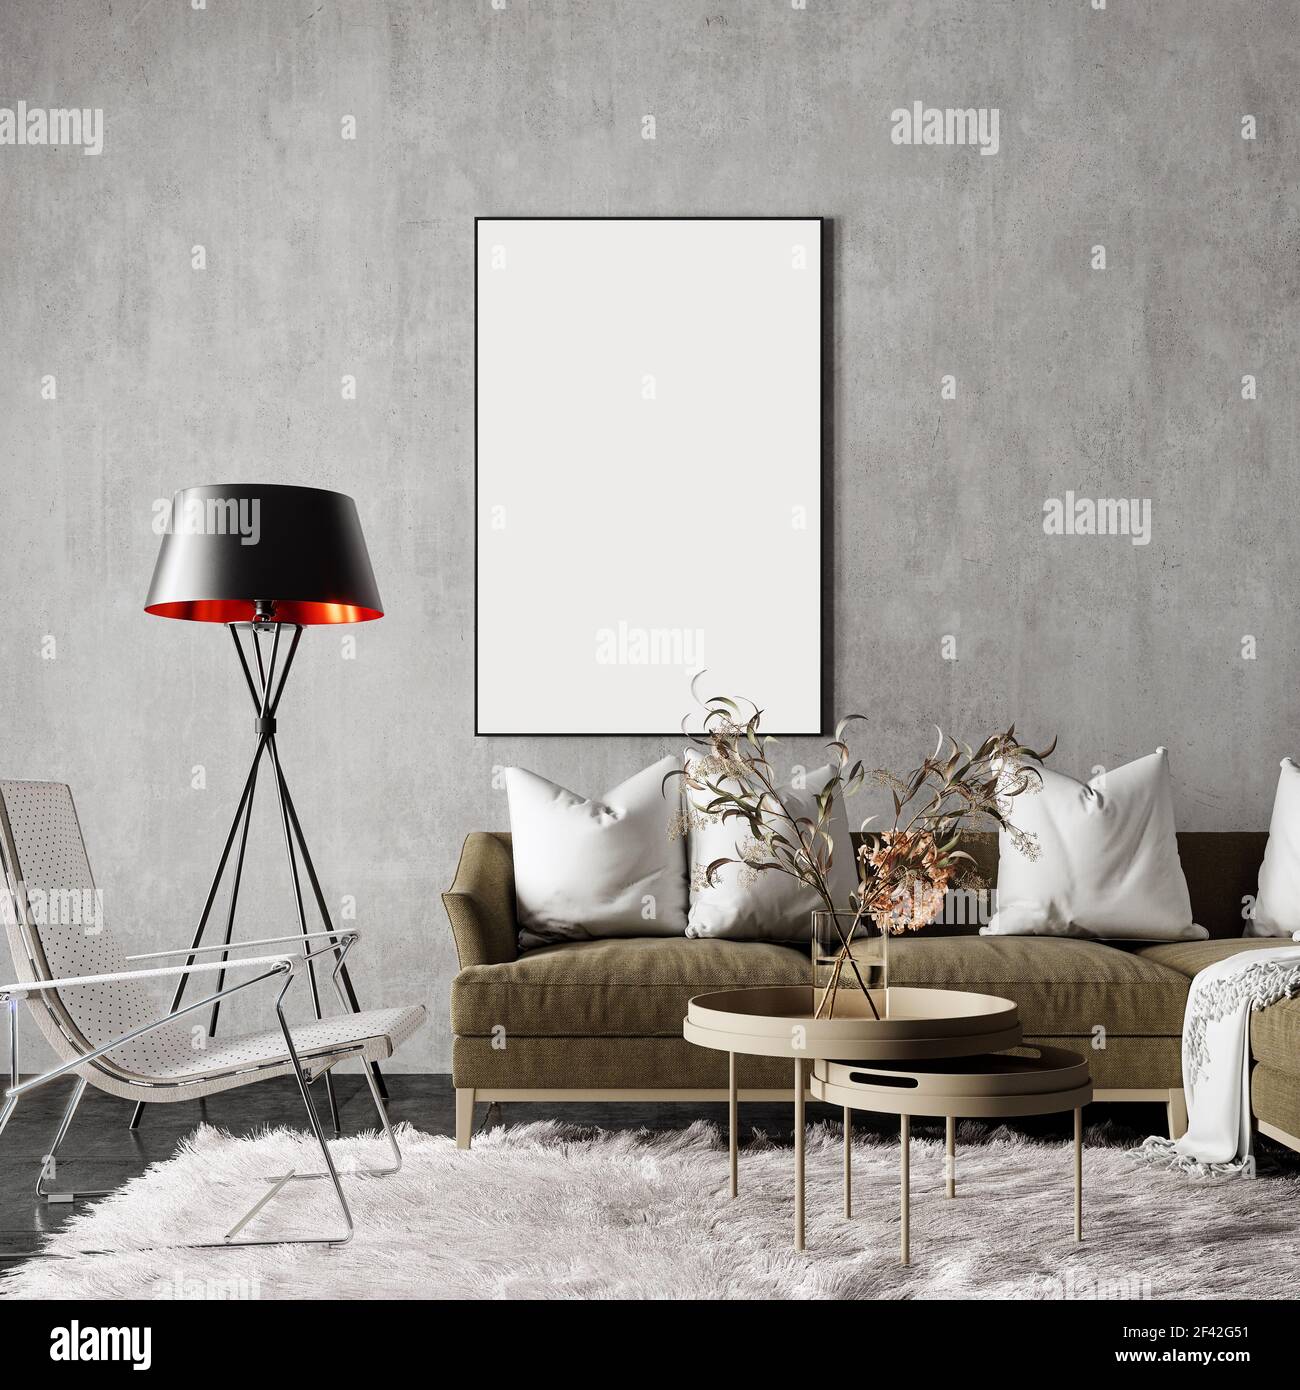 Modern living room interior design with white carpet and empty picture frame on the wall 3D Rendering, 3D Illustration Stock Photo